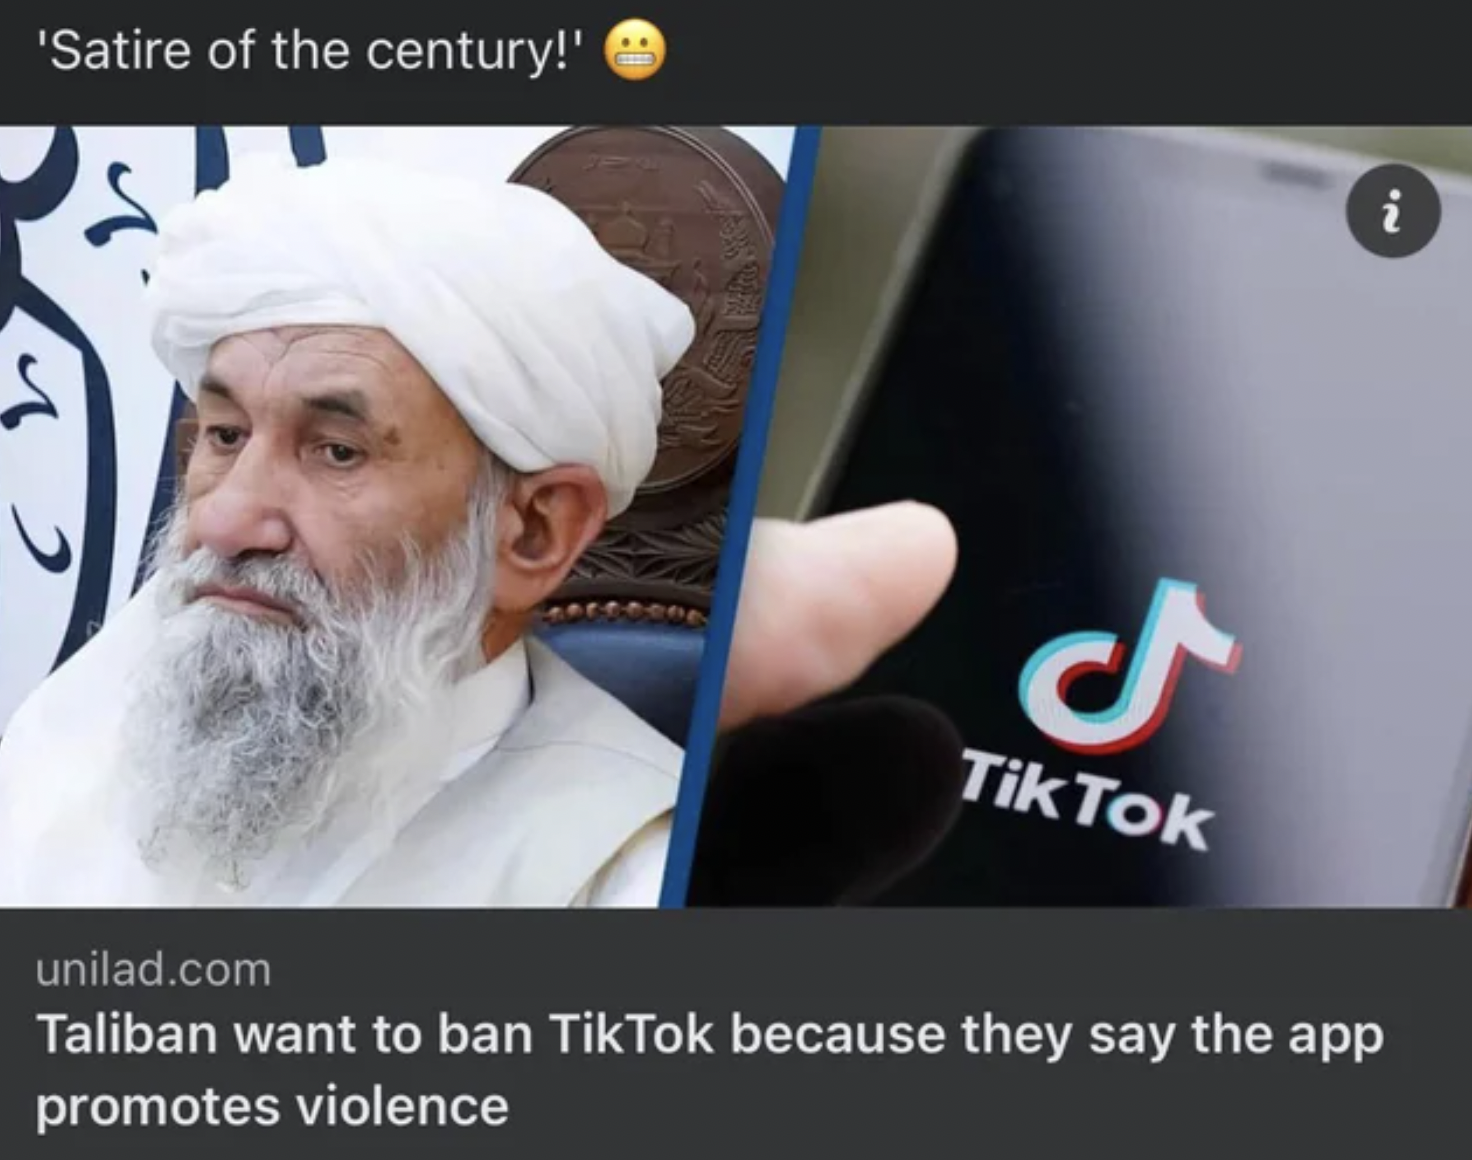 Friday facepalms - Taliban want to ban TikTok because they say the app promotes violence